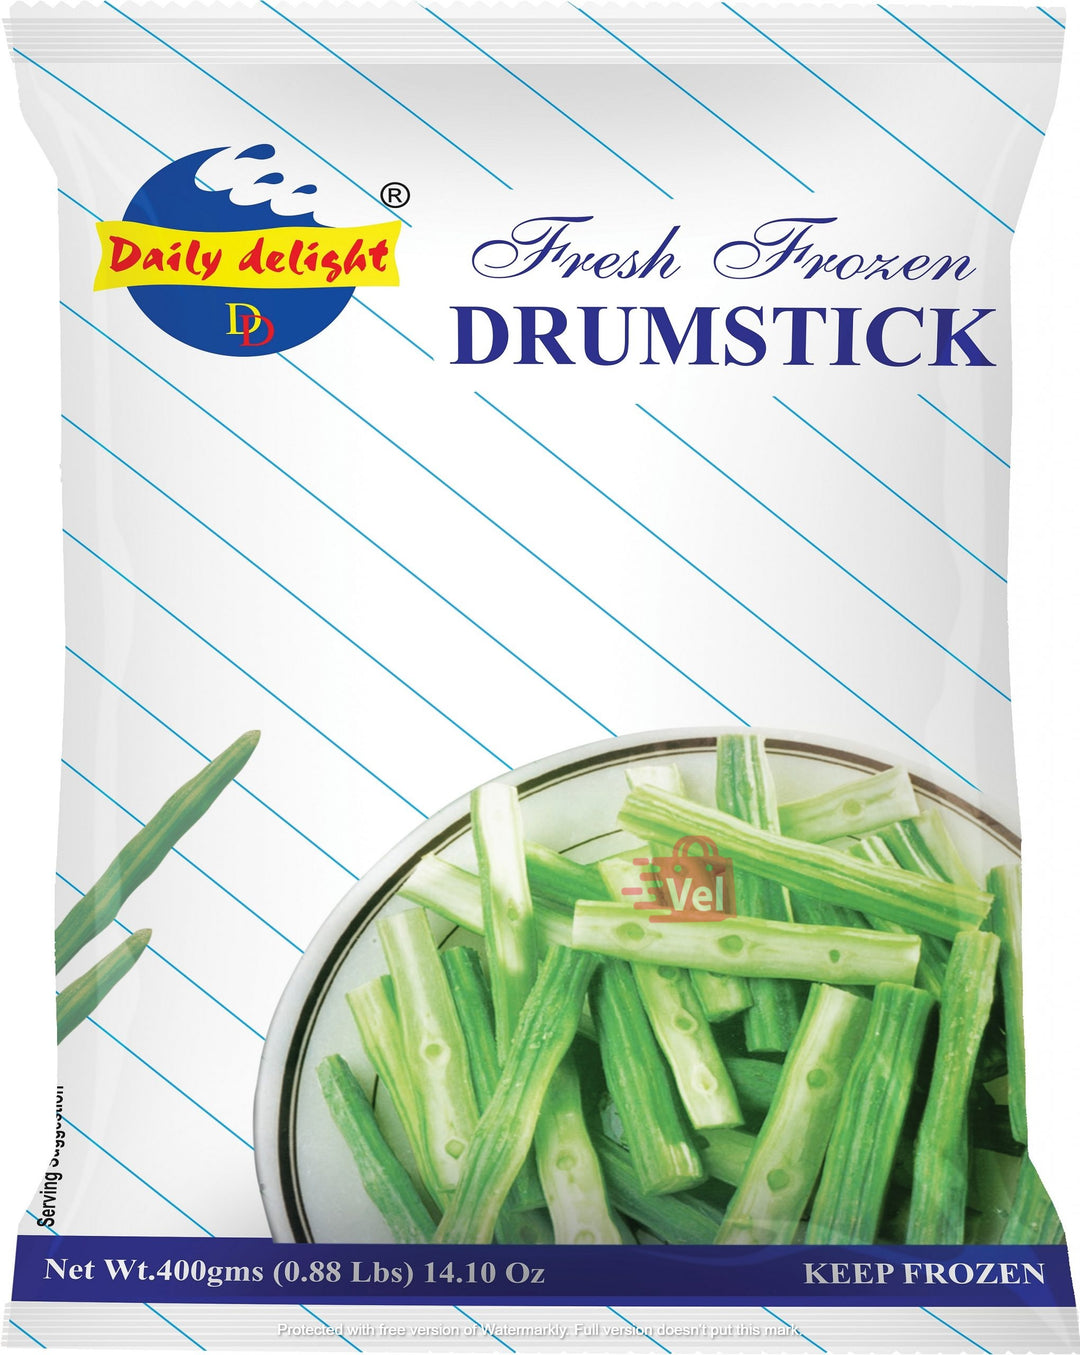 Daily Delight Drumstick 400G Frozen